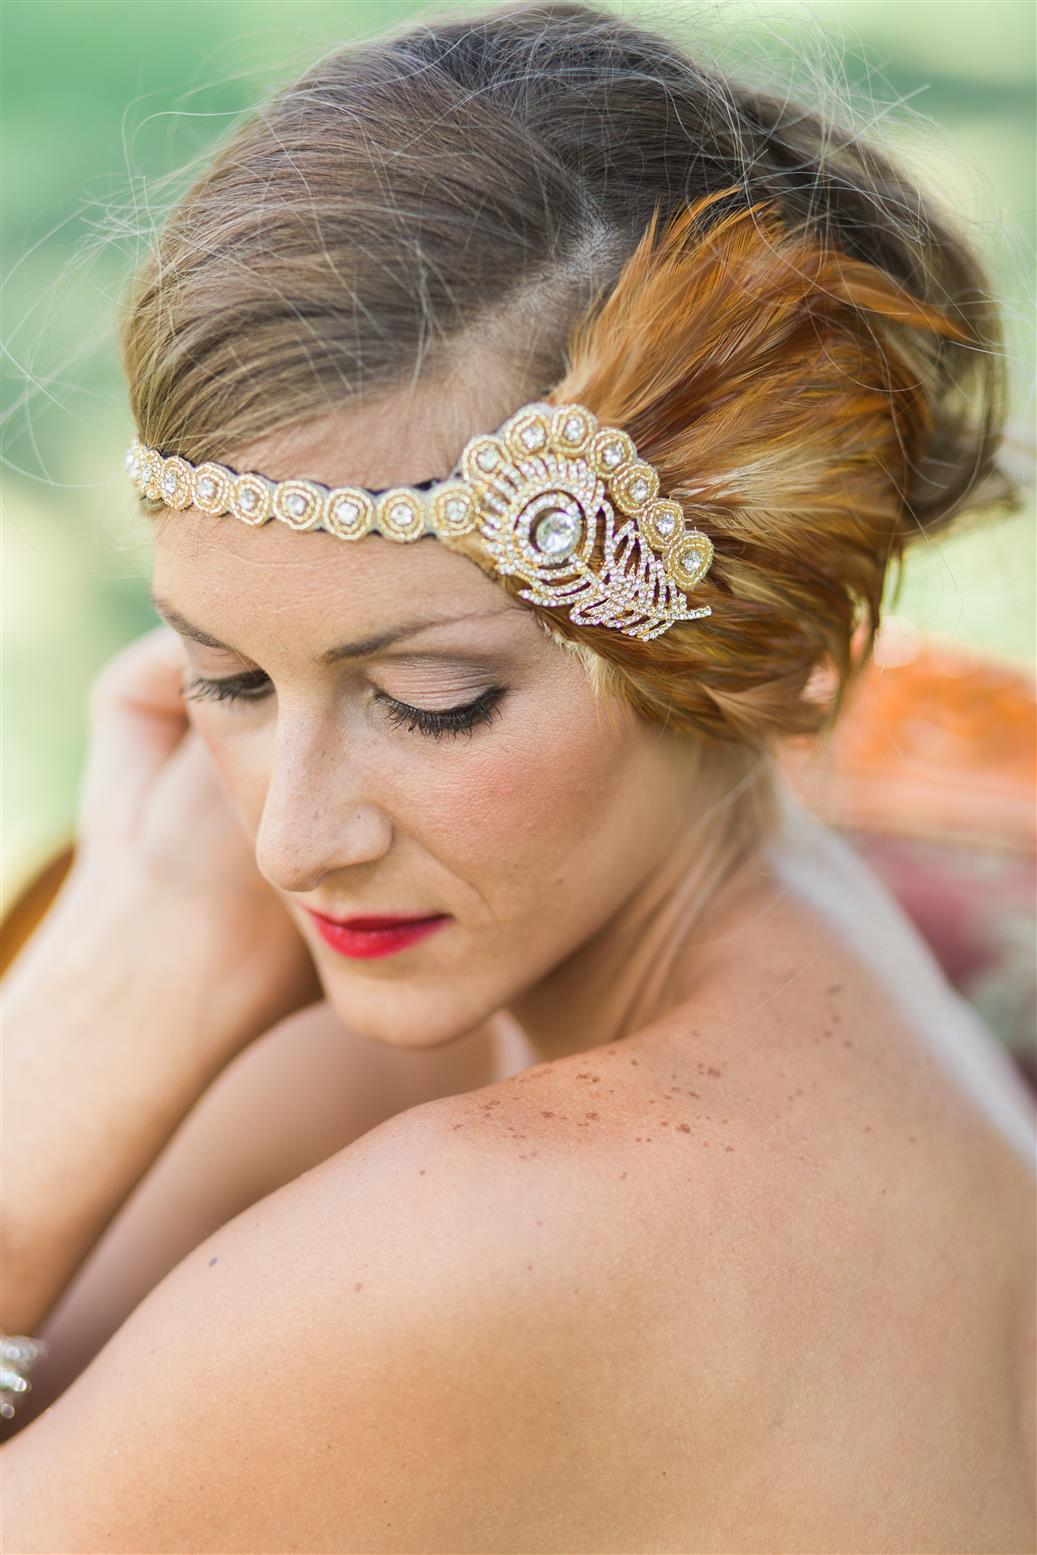 Bianca Flapper Bridal Hair Accessory from Nestina Accessories 2015 Collection